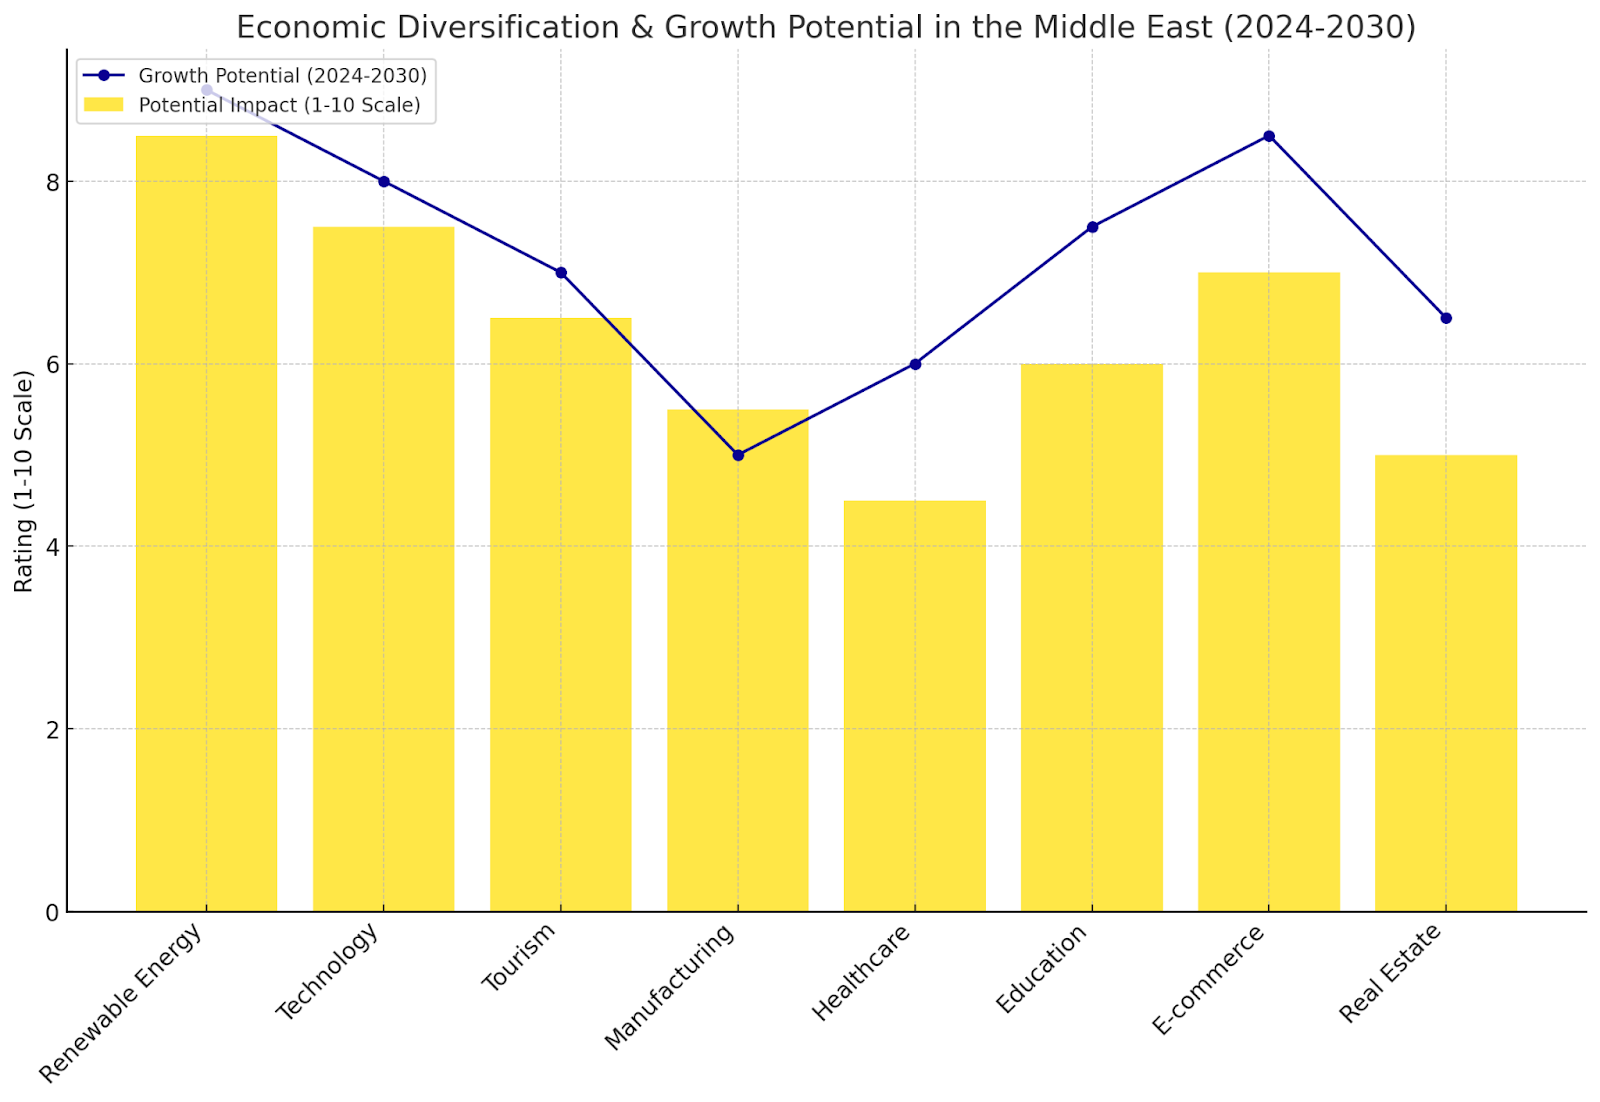 Economic Diversification & Growth Potential in the Middle East (2024-2030)